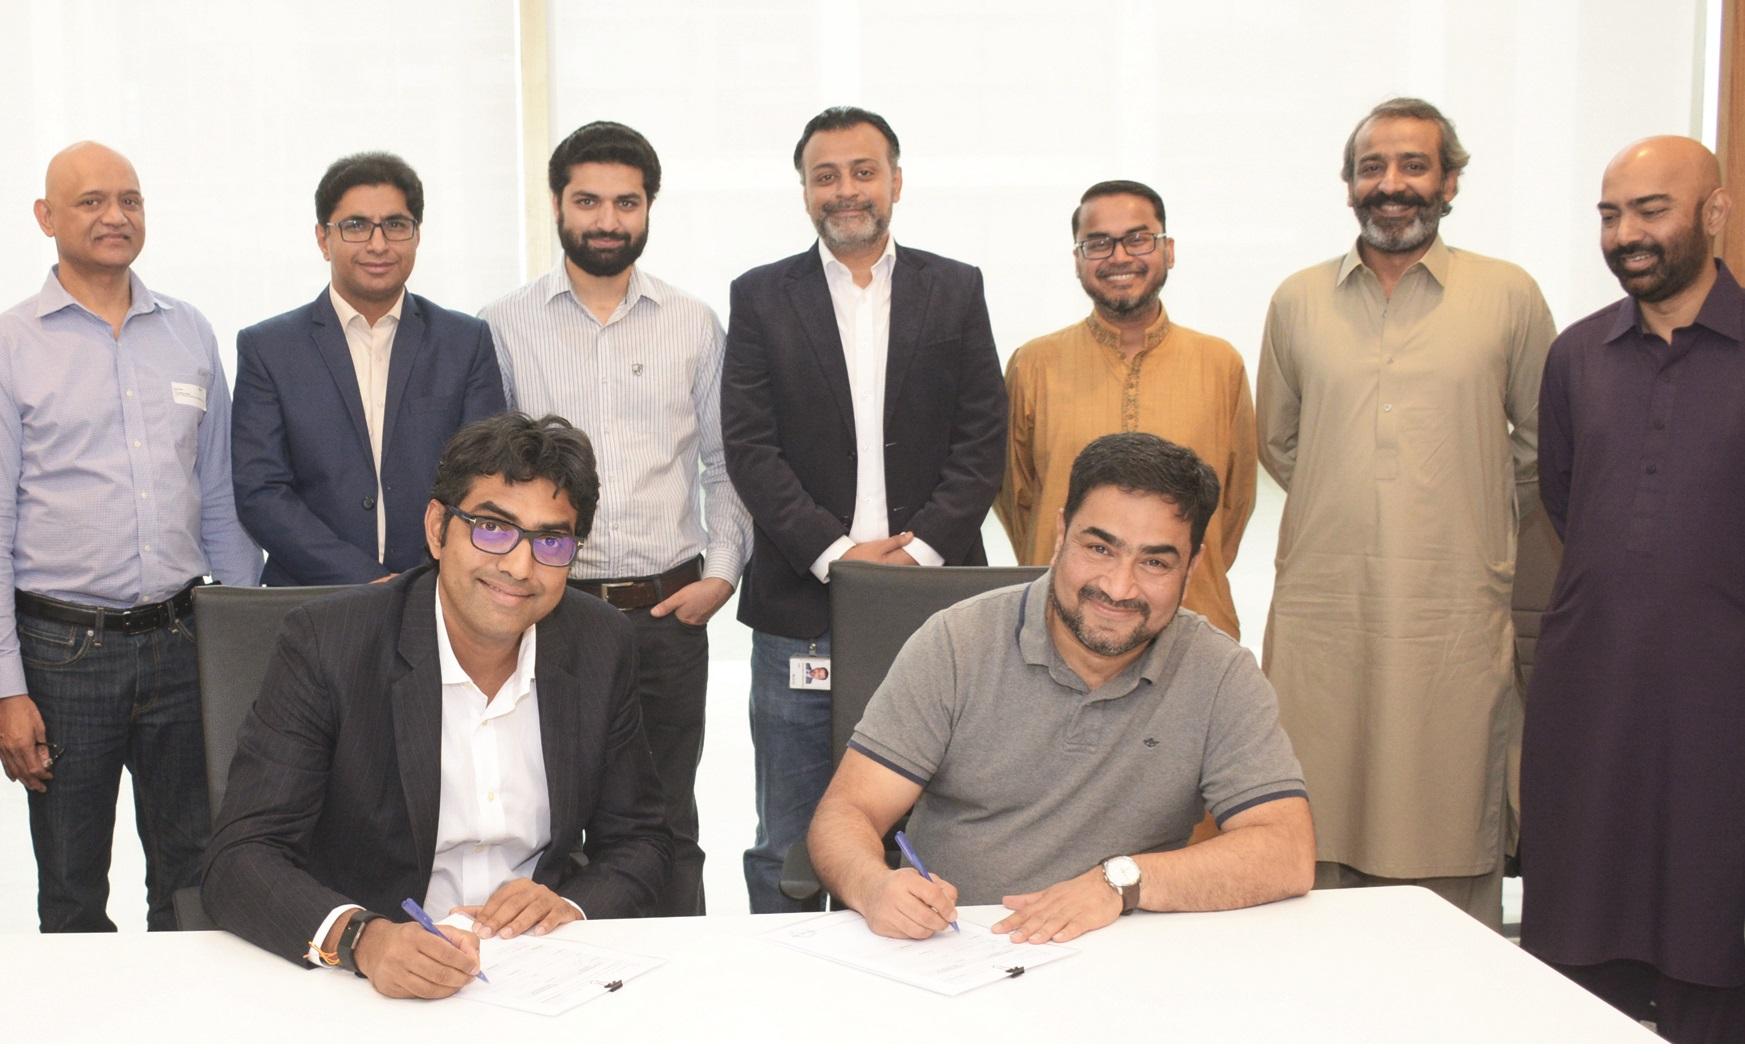 edotco Pakistan and Telenor Pakistan partner to bring connectivity to Dadu and two National highways, N55 and N25